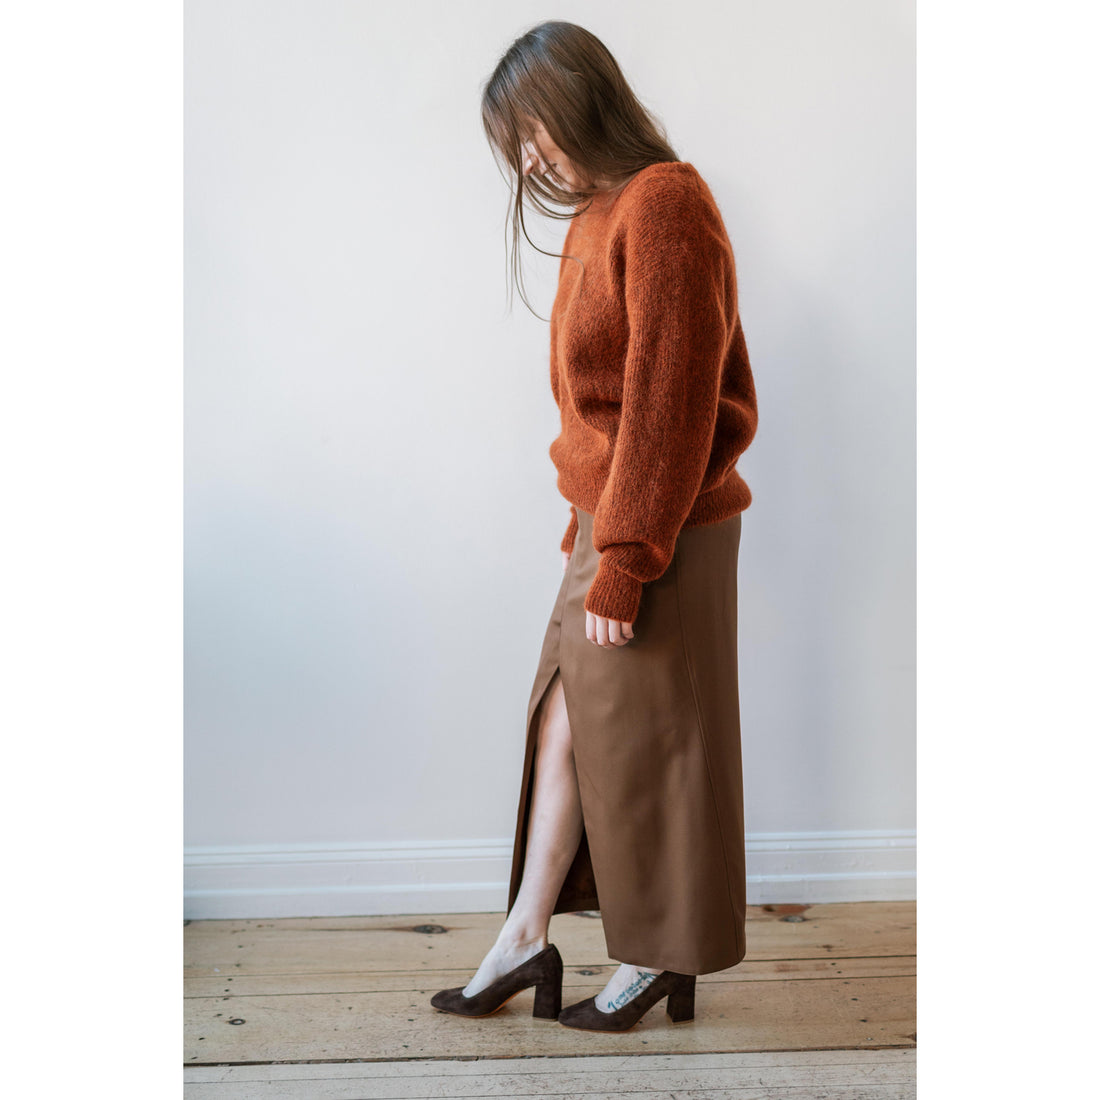 Hope Tail Skirt in Brown